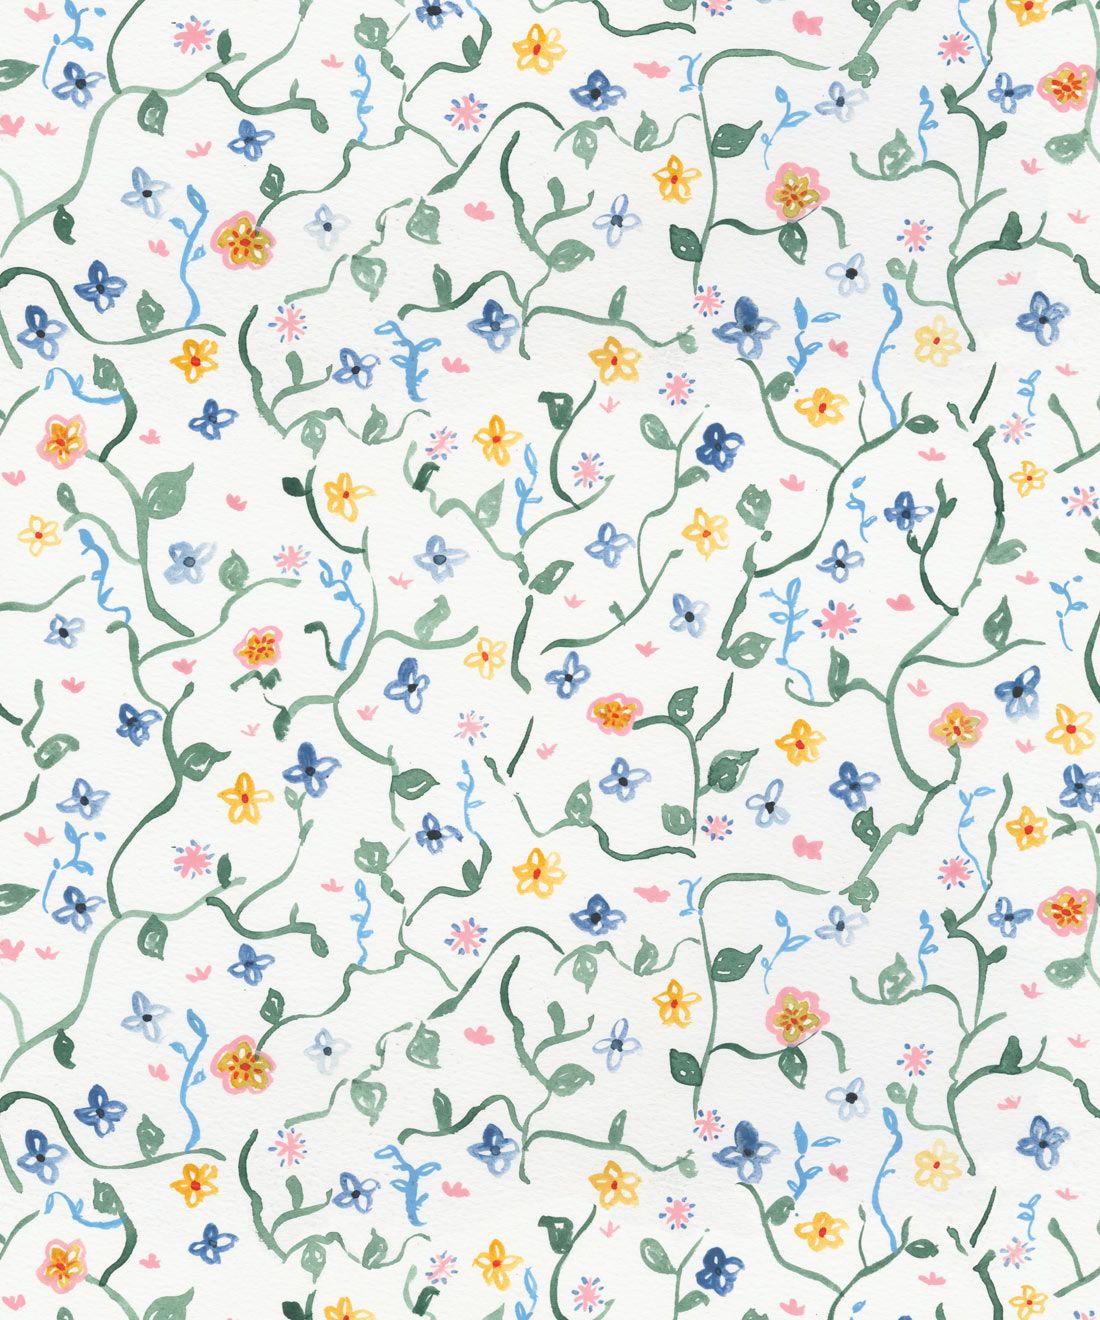 A floral pattern with blue, green and yellow flowers - Garden